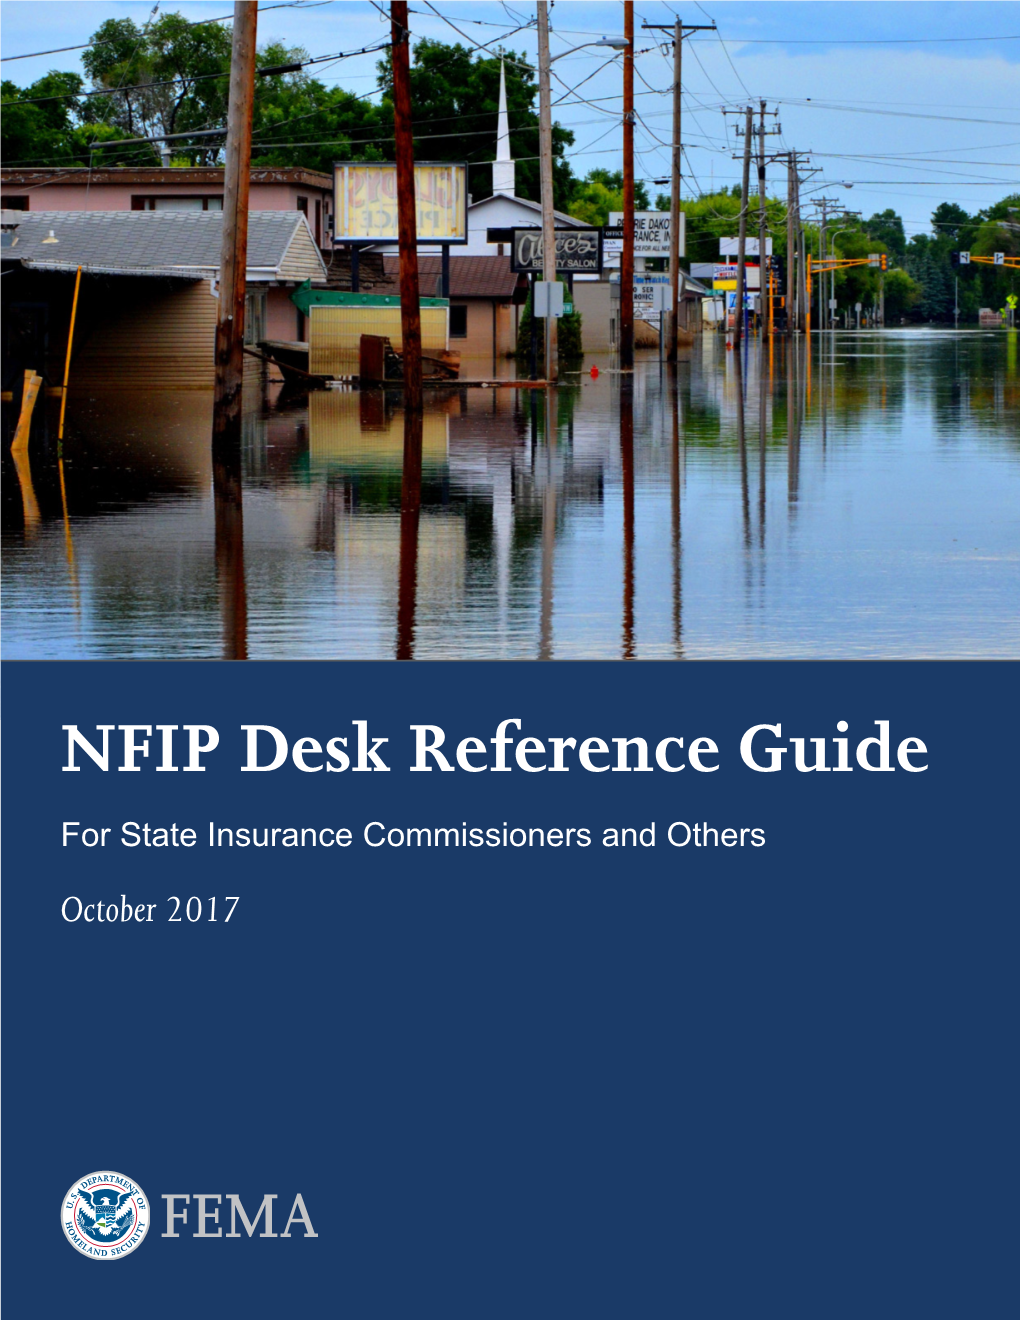 NFIP Desk Reference Guide for State Insurance Commissioners and Others October 2017